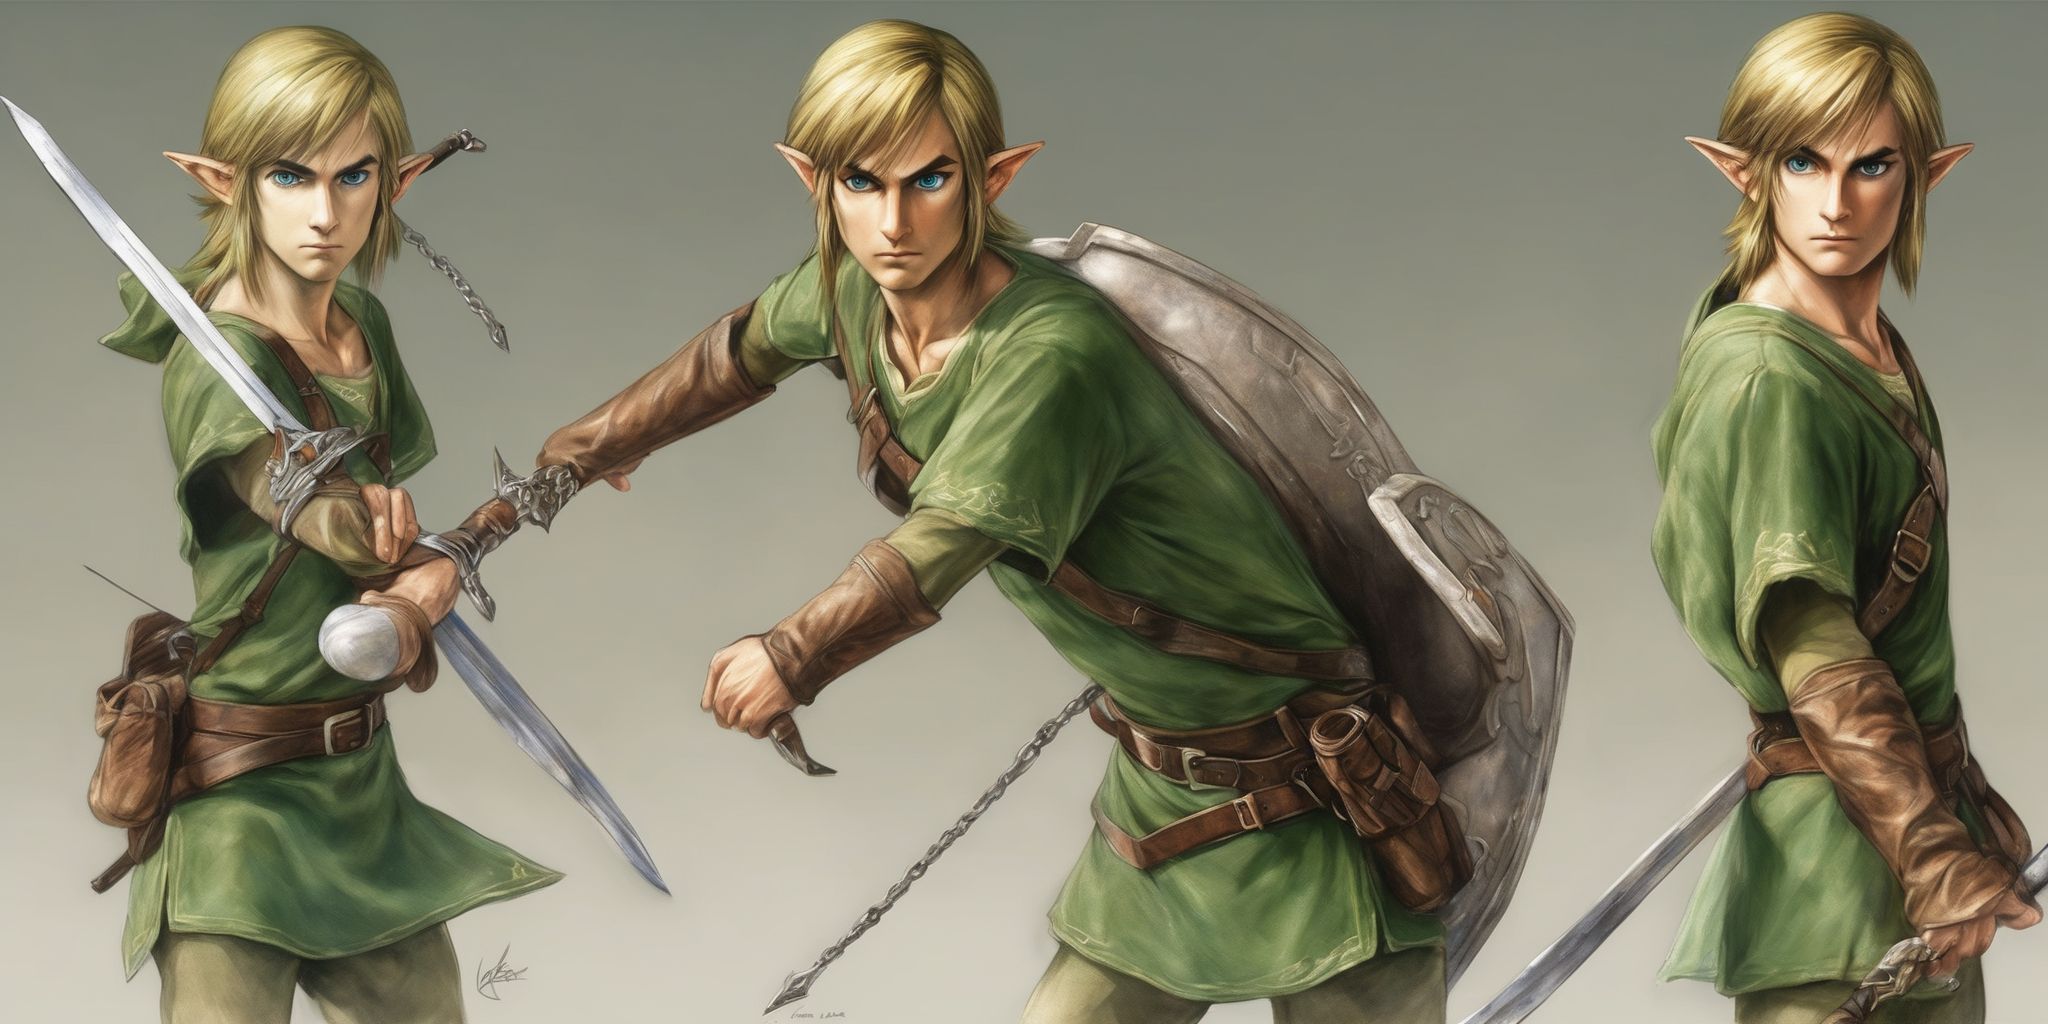 Link  in realistic, photographic style